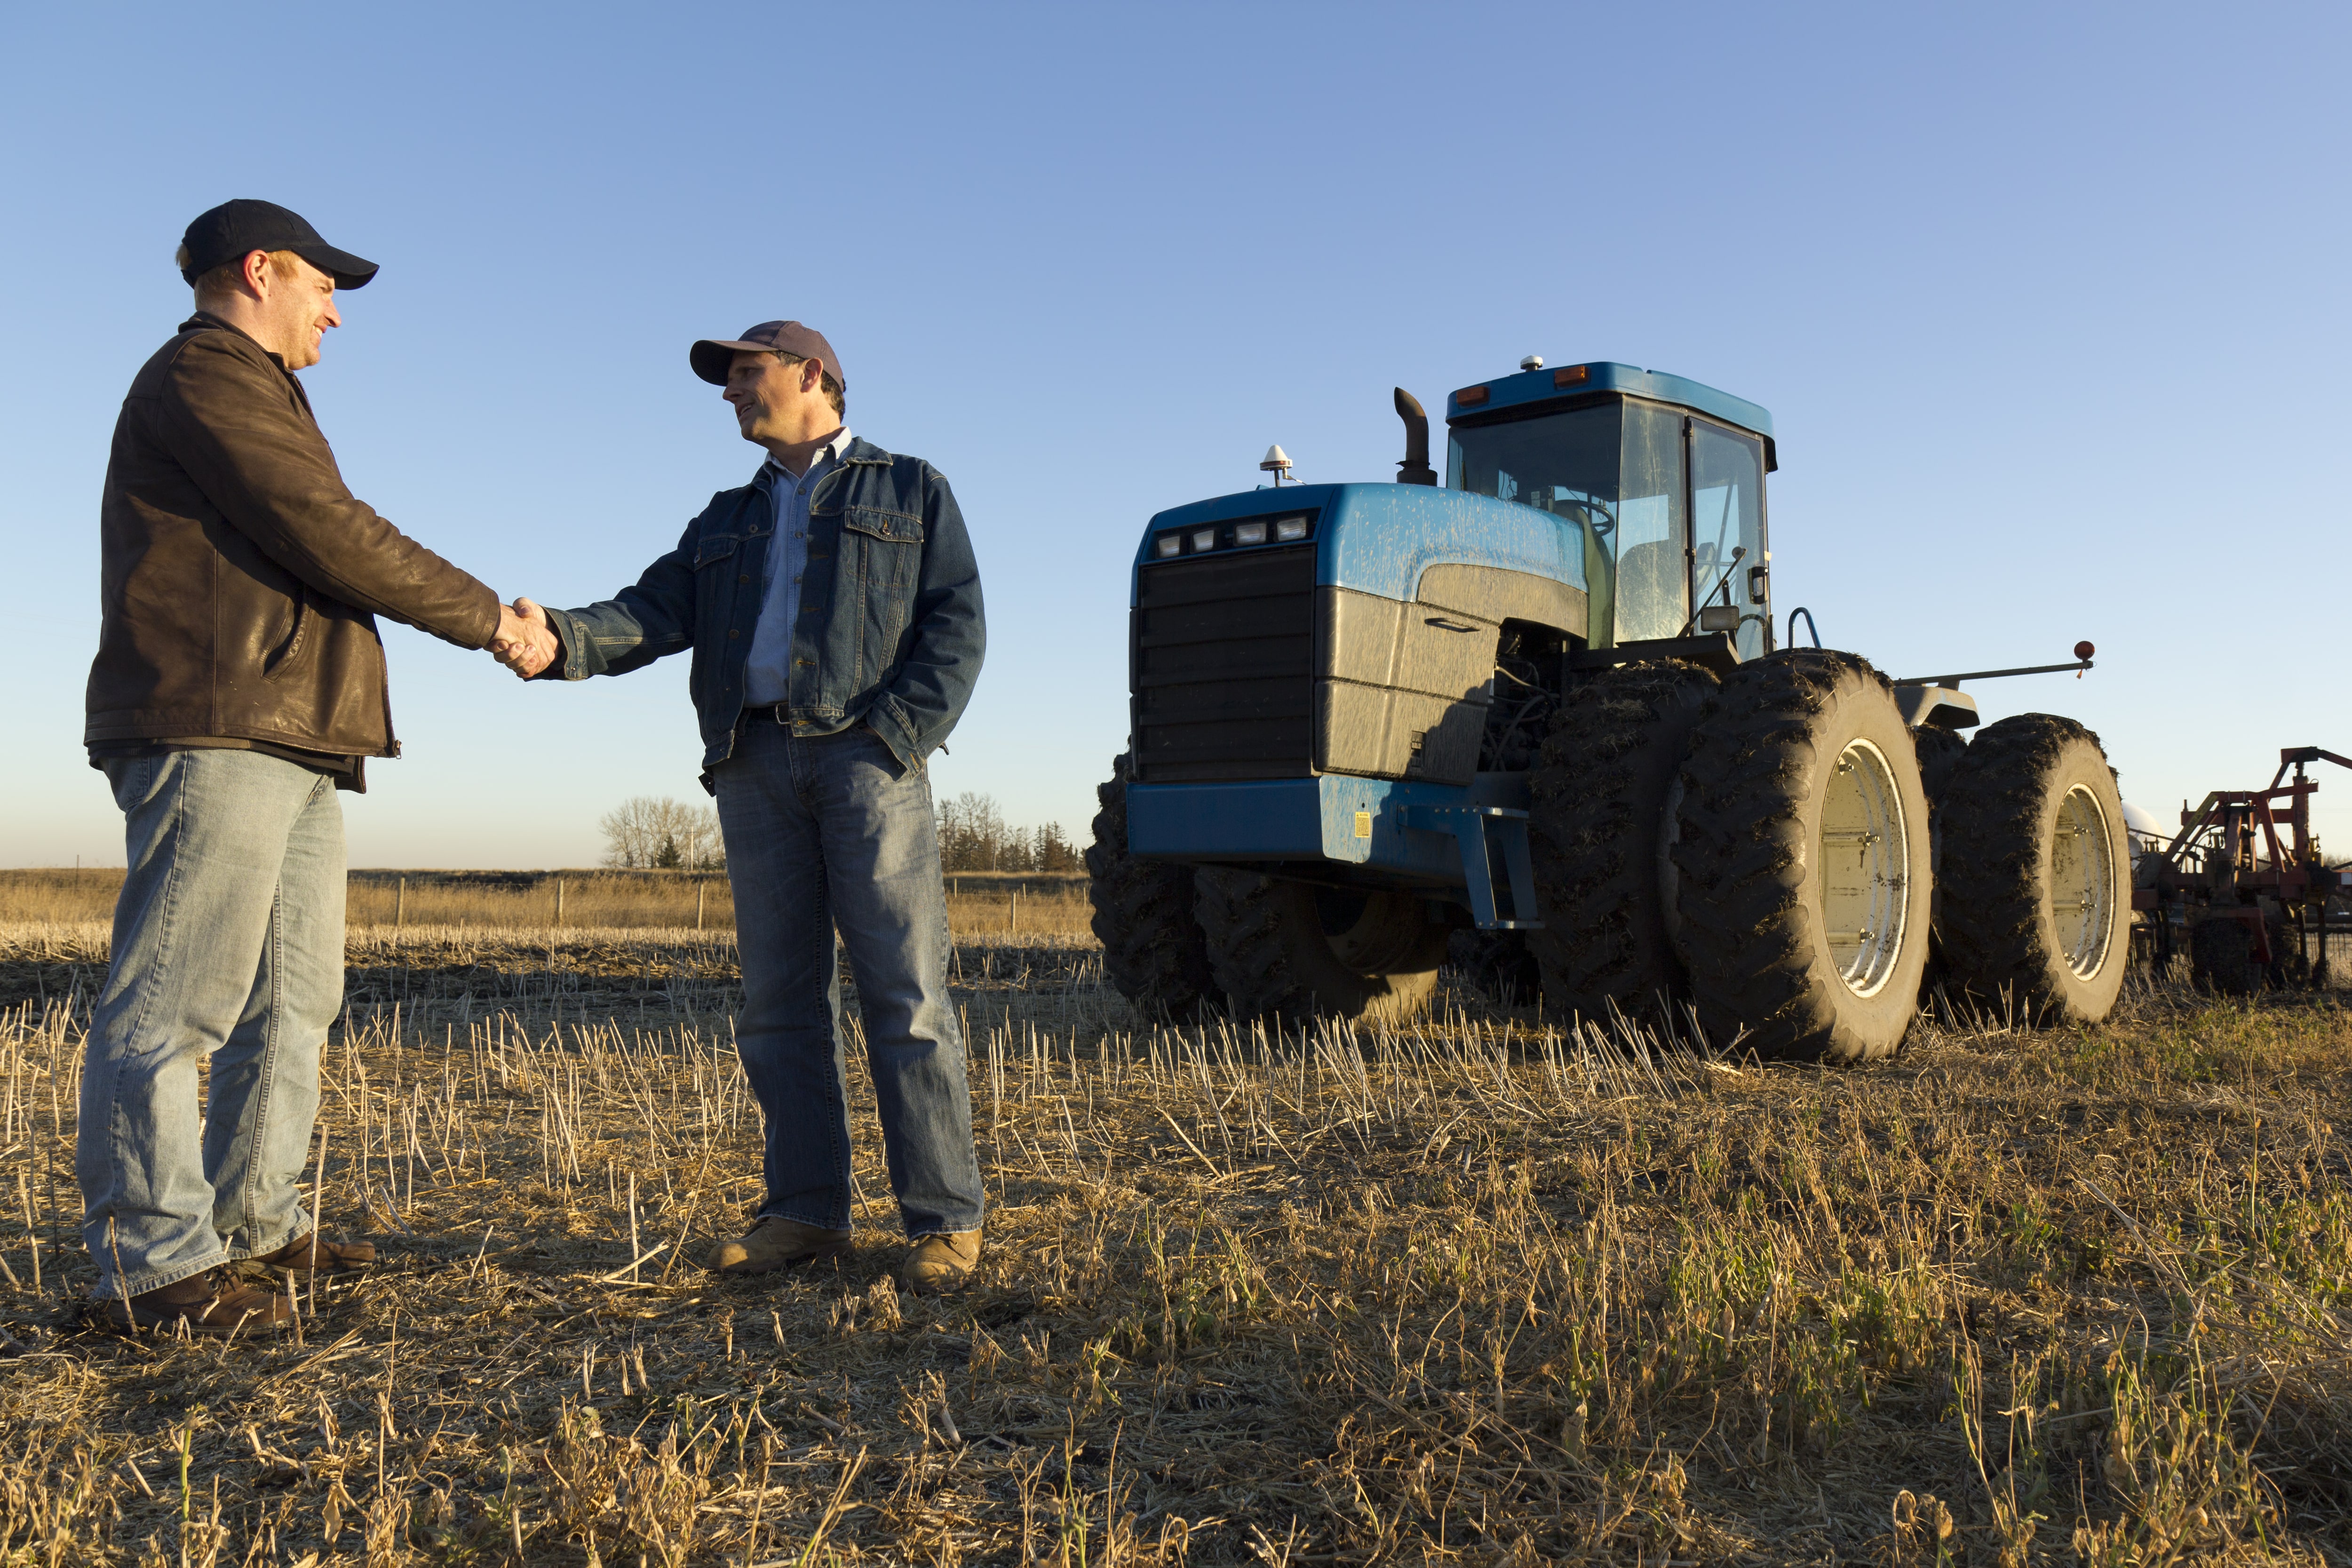 Two persons shaking hands in a field in front of a tractor